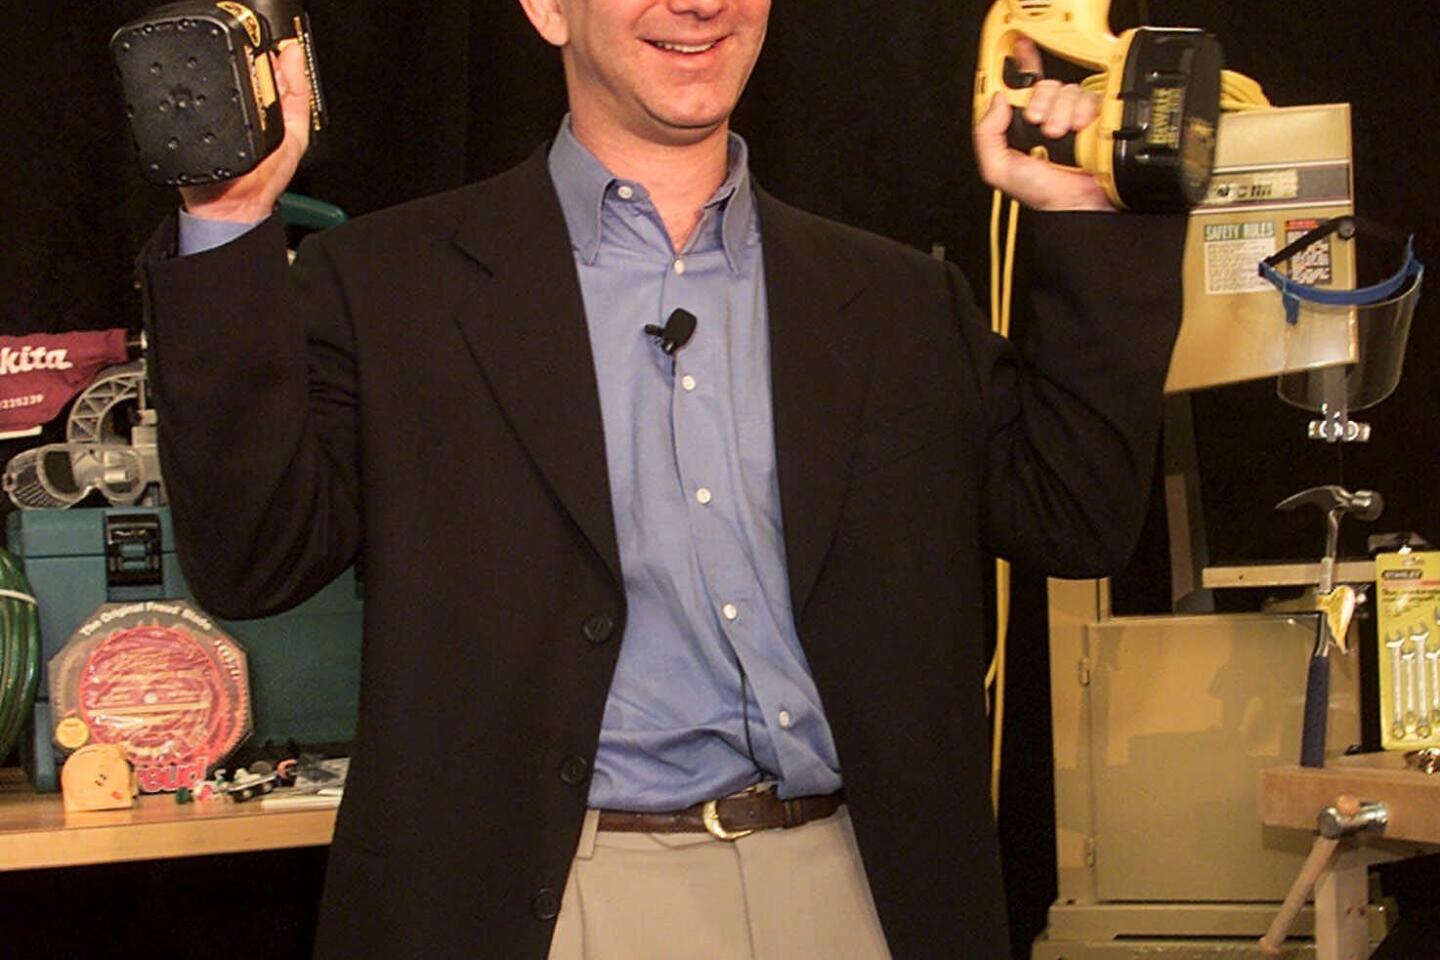 Jeff Bezos Becomes Richest Man in Modern History